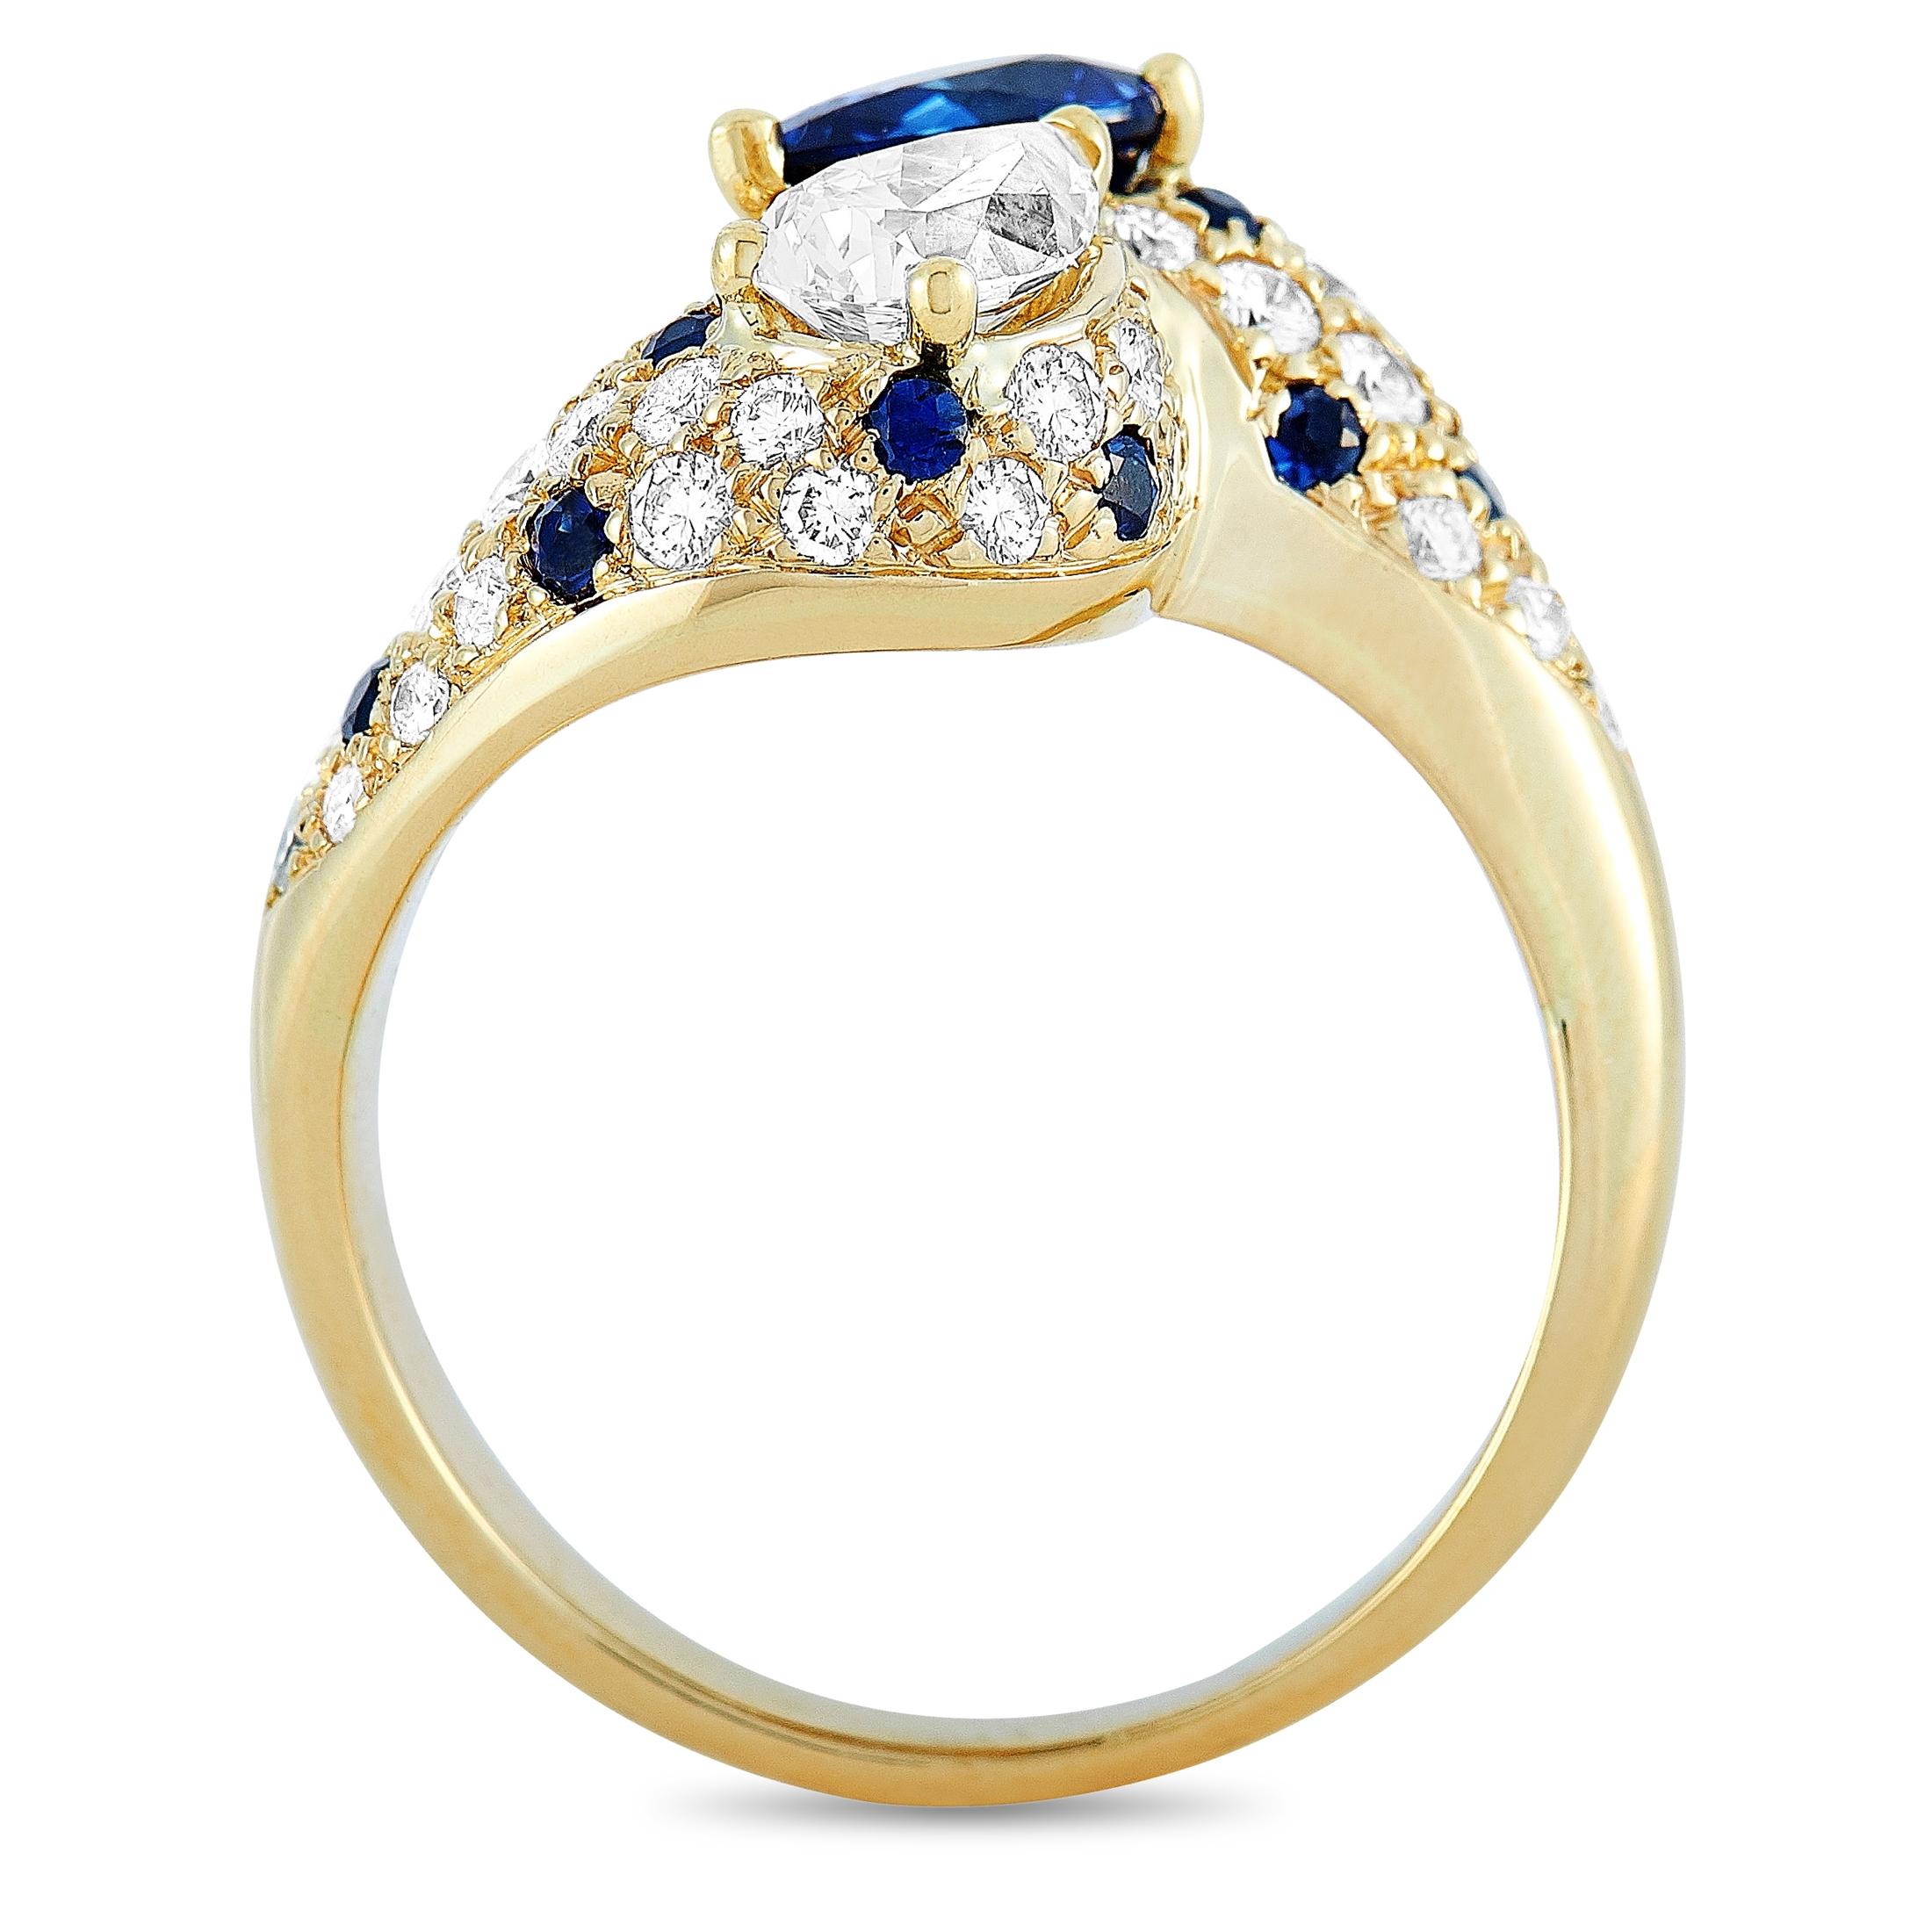 This Graff ring is made of 18K yellow gold and weighs 7.2 grams, boasting band thickness of 2 mm and top height of 6 mm, while top dimensions measure 20 by 13 mm. The ring is embellished with diamonds and sapphires that total 1.40 and 1.28 carats